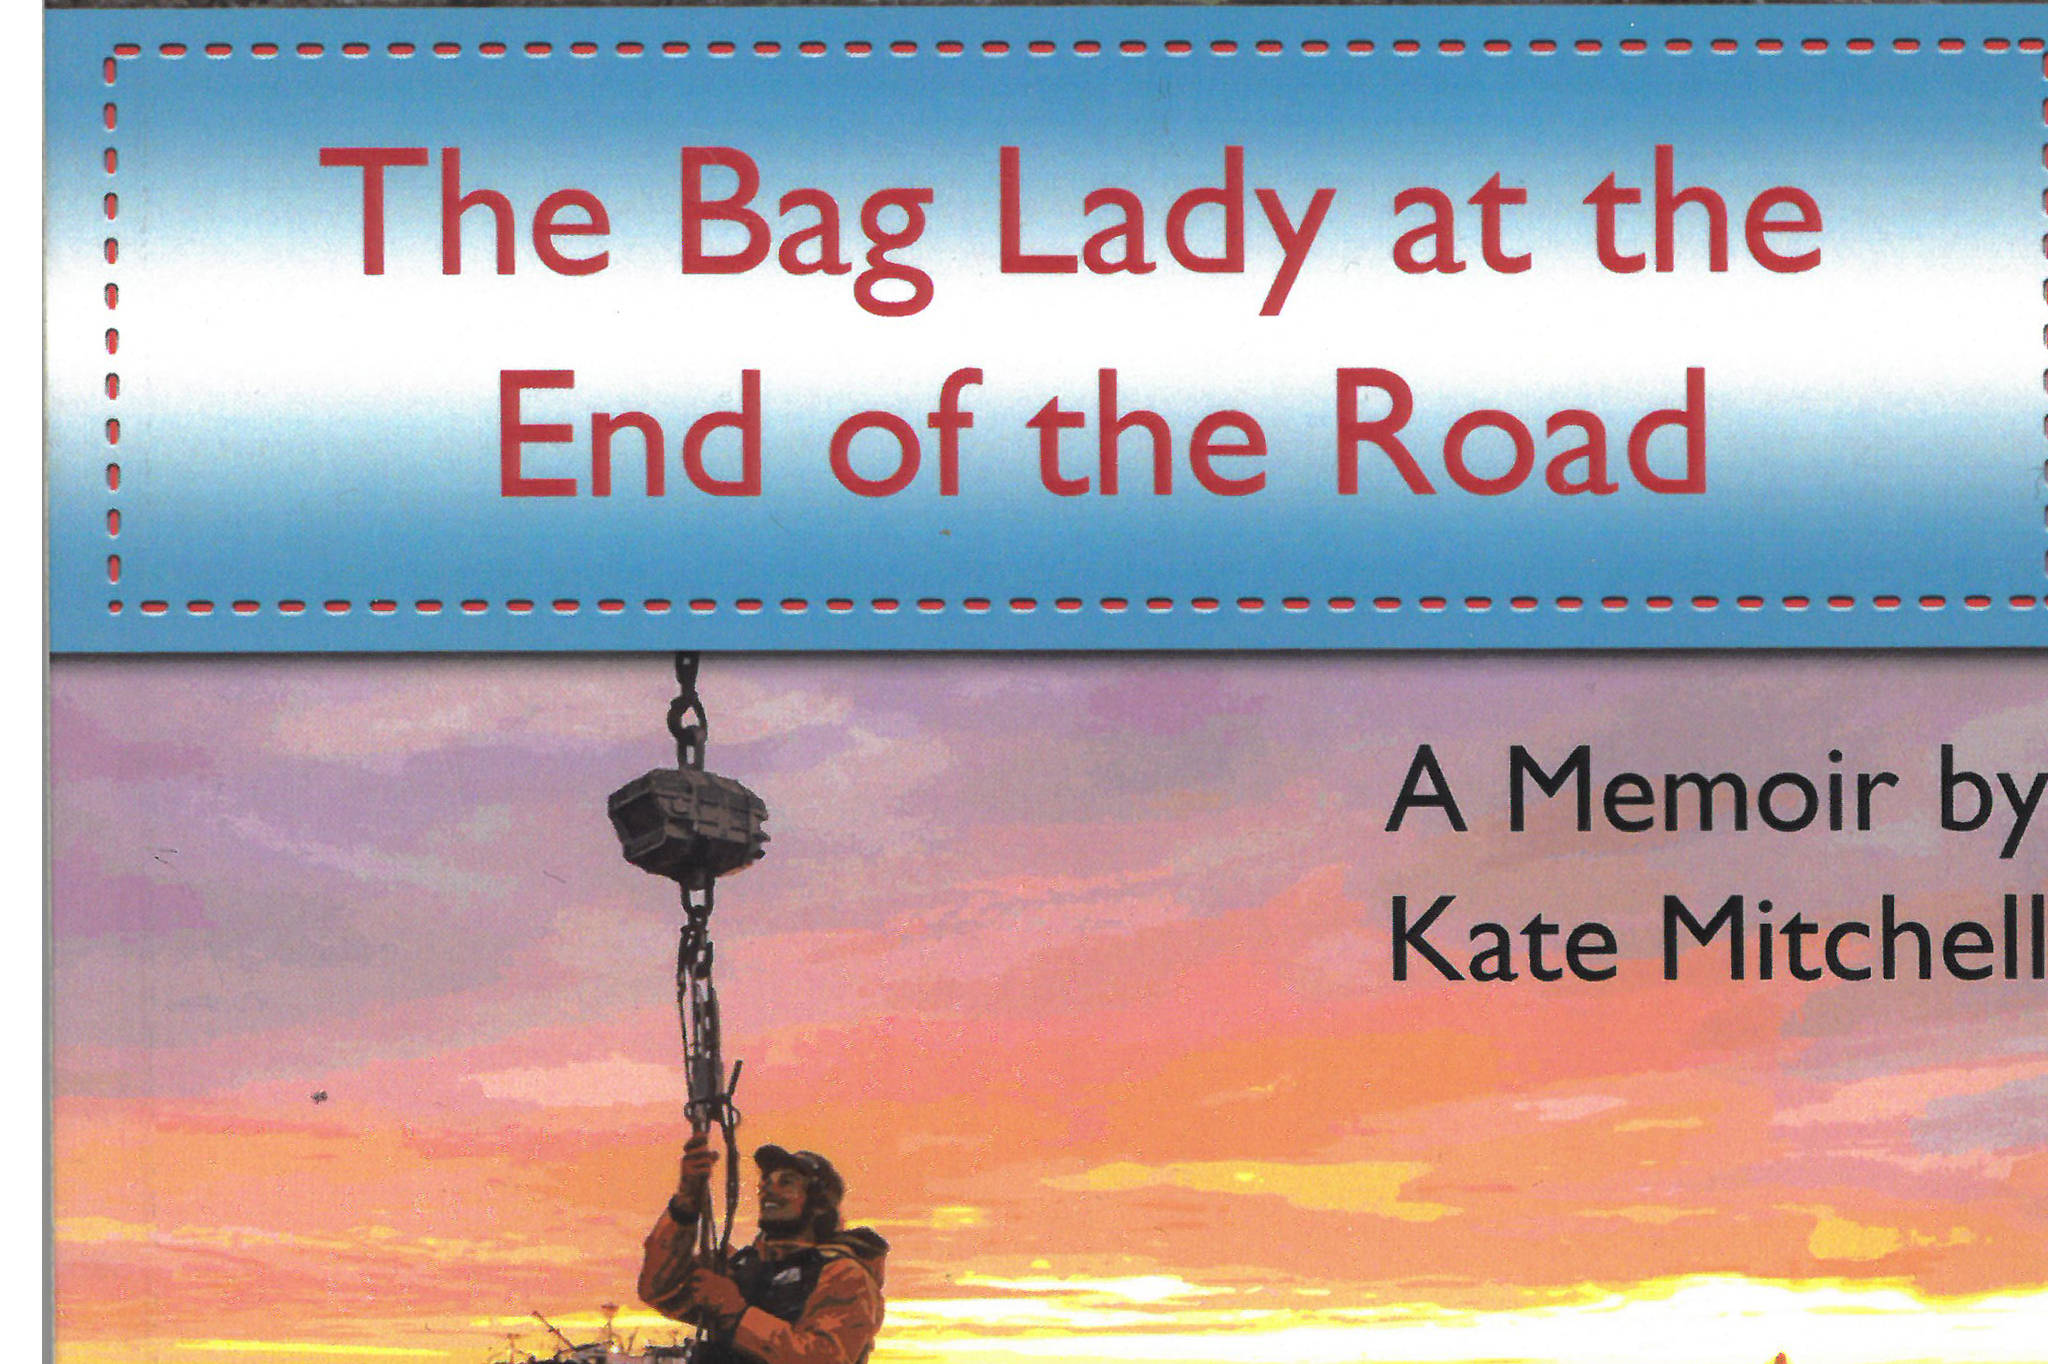 The cover of Kate Mitchell’s “The Bag Lady at the End of the Road,” published in 2018 by Wizard Works. (Image provided)